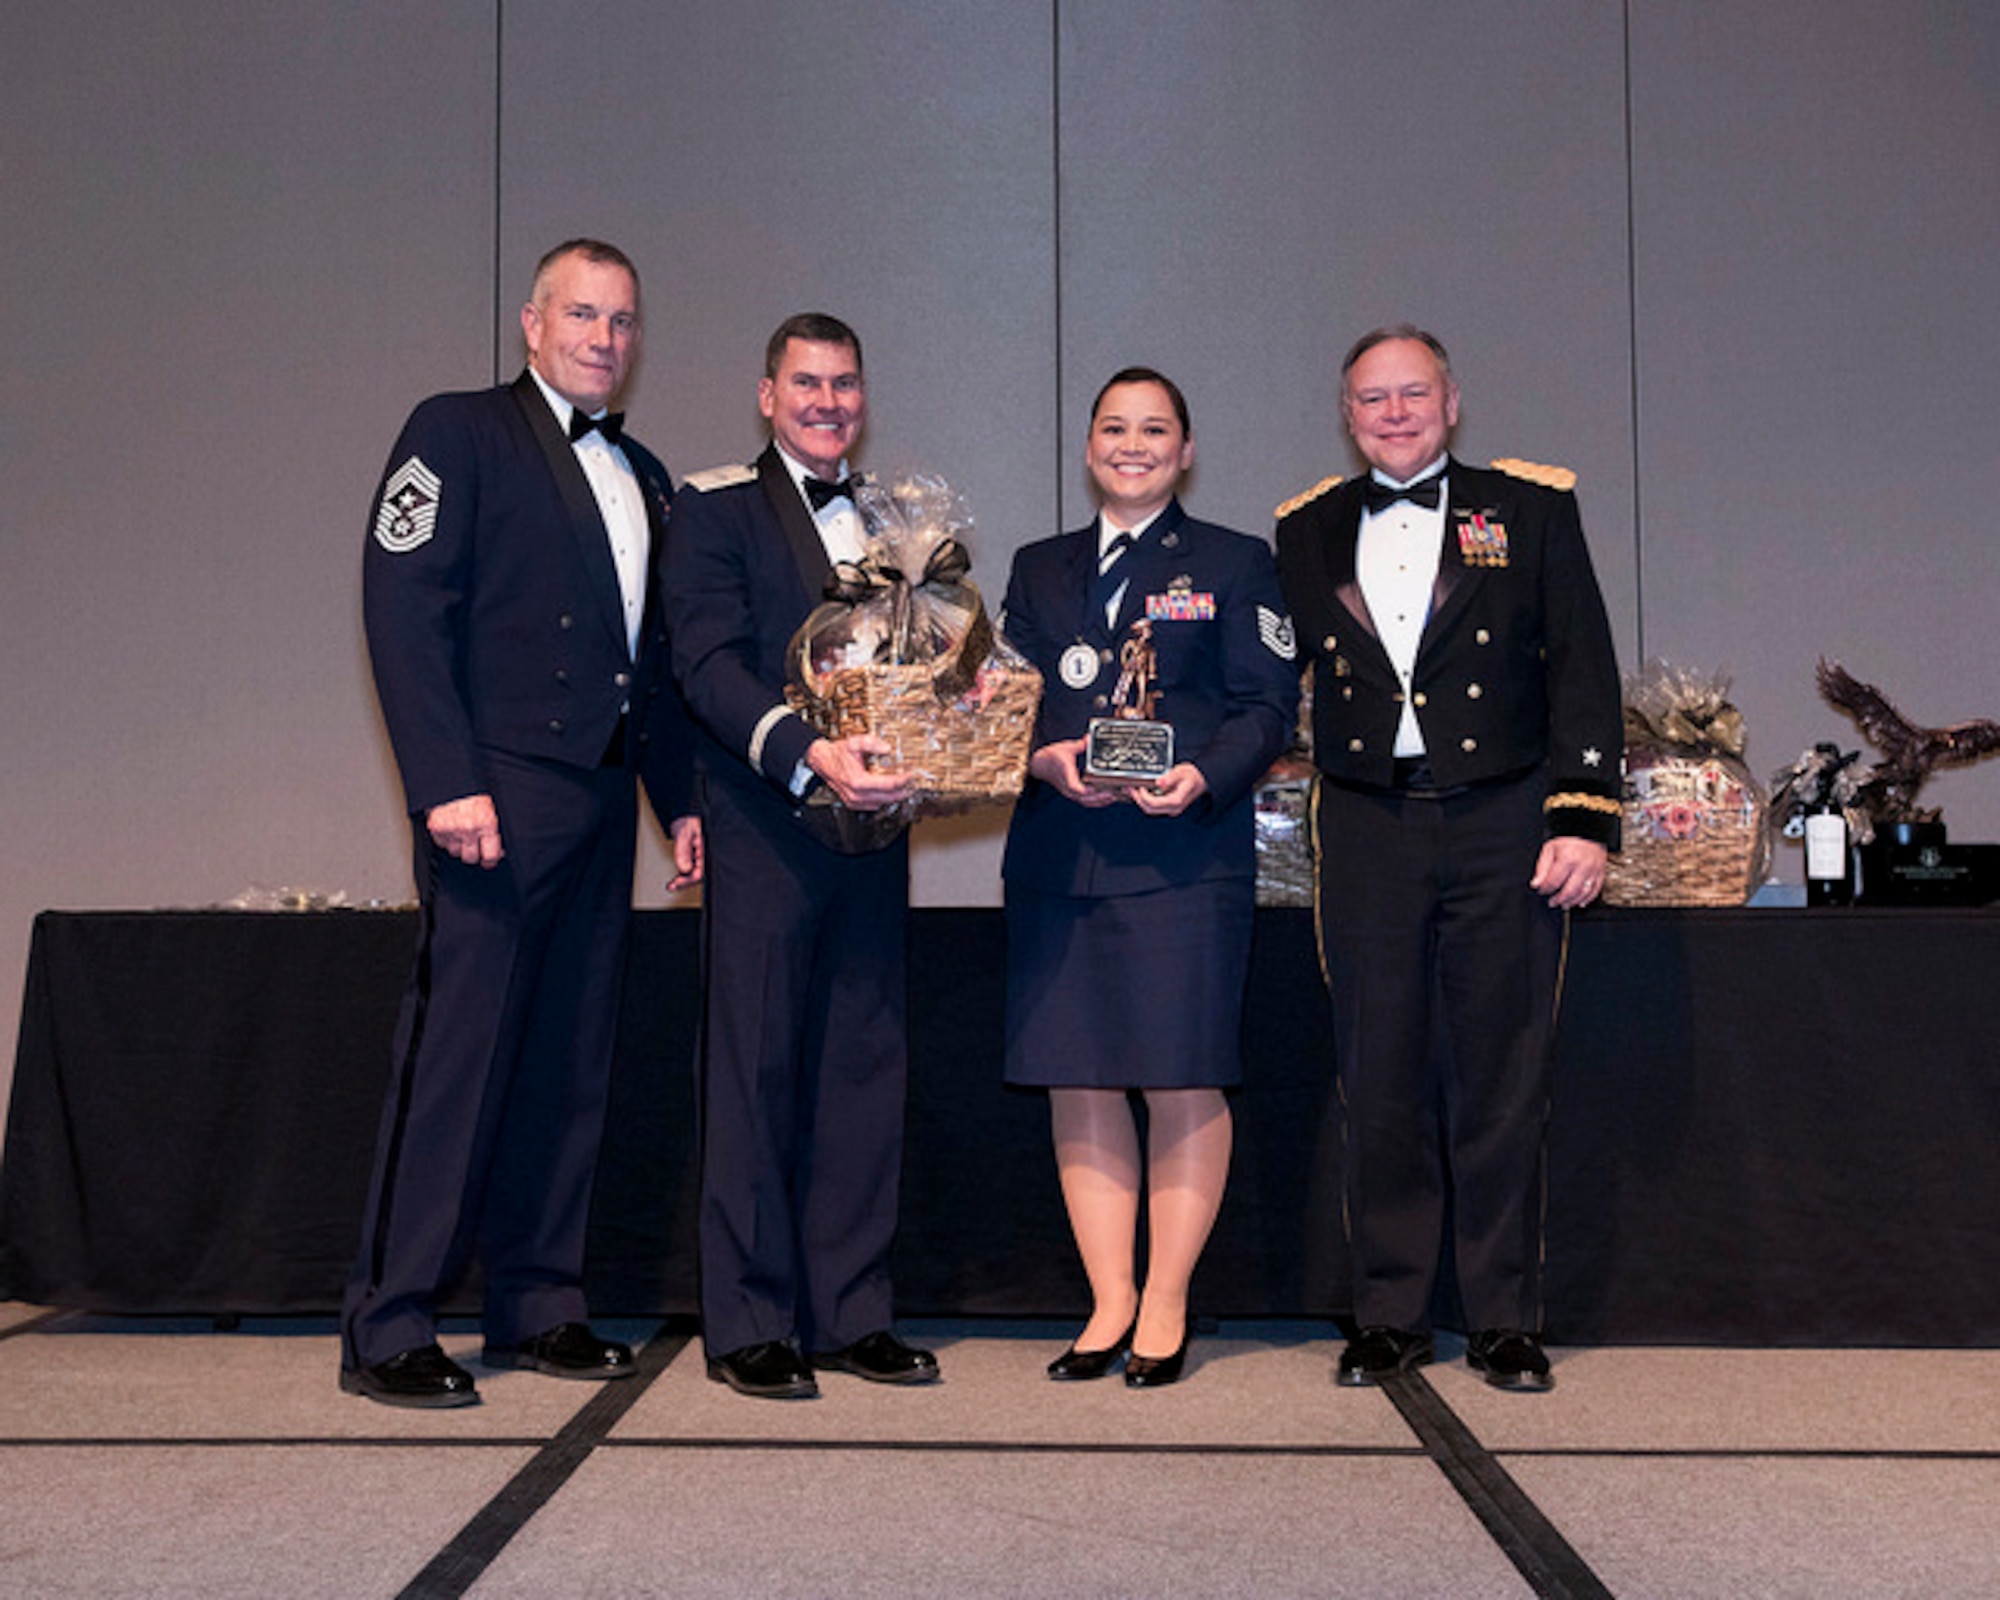 Tech. Sgt. Rivanita Noyes of the 225th Air Defense Squadron wins NCO of the Year during the Washington Air National Guard 8th Annual Awards banquet.  Pictured from right to left are: Maj. Gen. Brett Daugherty, The Adjutant General, Washington; Tech. Sgt. Rivanita Noyes; Brig. Gen. John Tuohy, the Assistant Adjutant General - Air, Washington; and Chief Master Sgt. Max Tidwell, WA ANG Command Chief.  (U.S. Air Force photo by Tech. Sgt. Michael Brown)